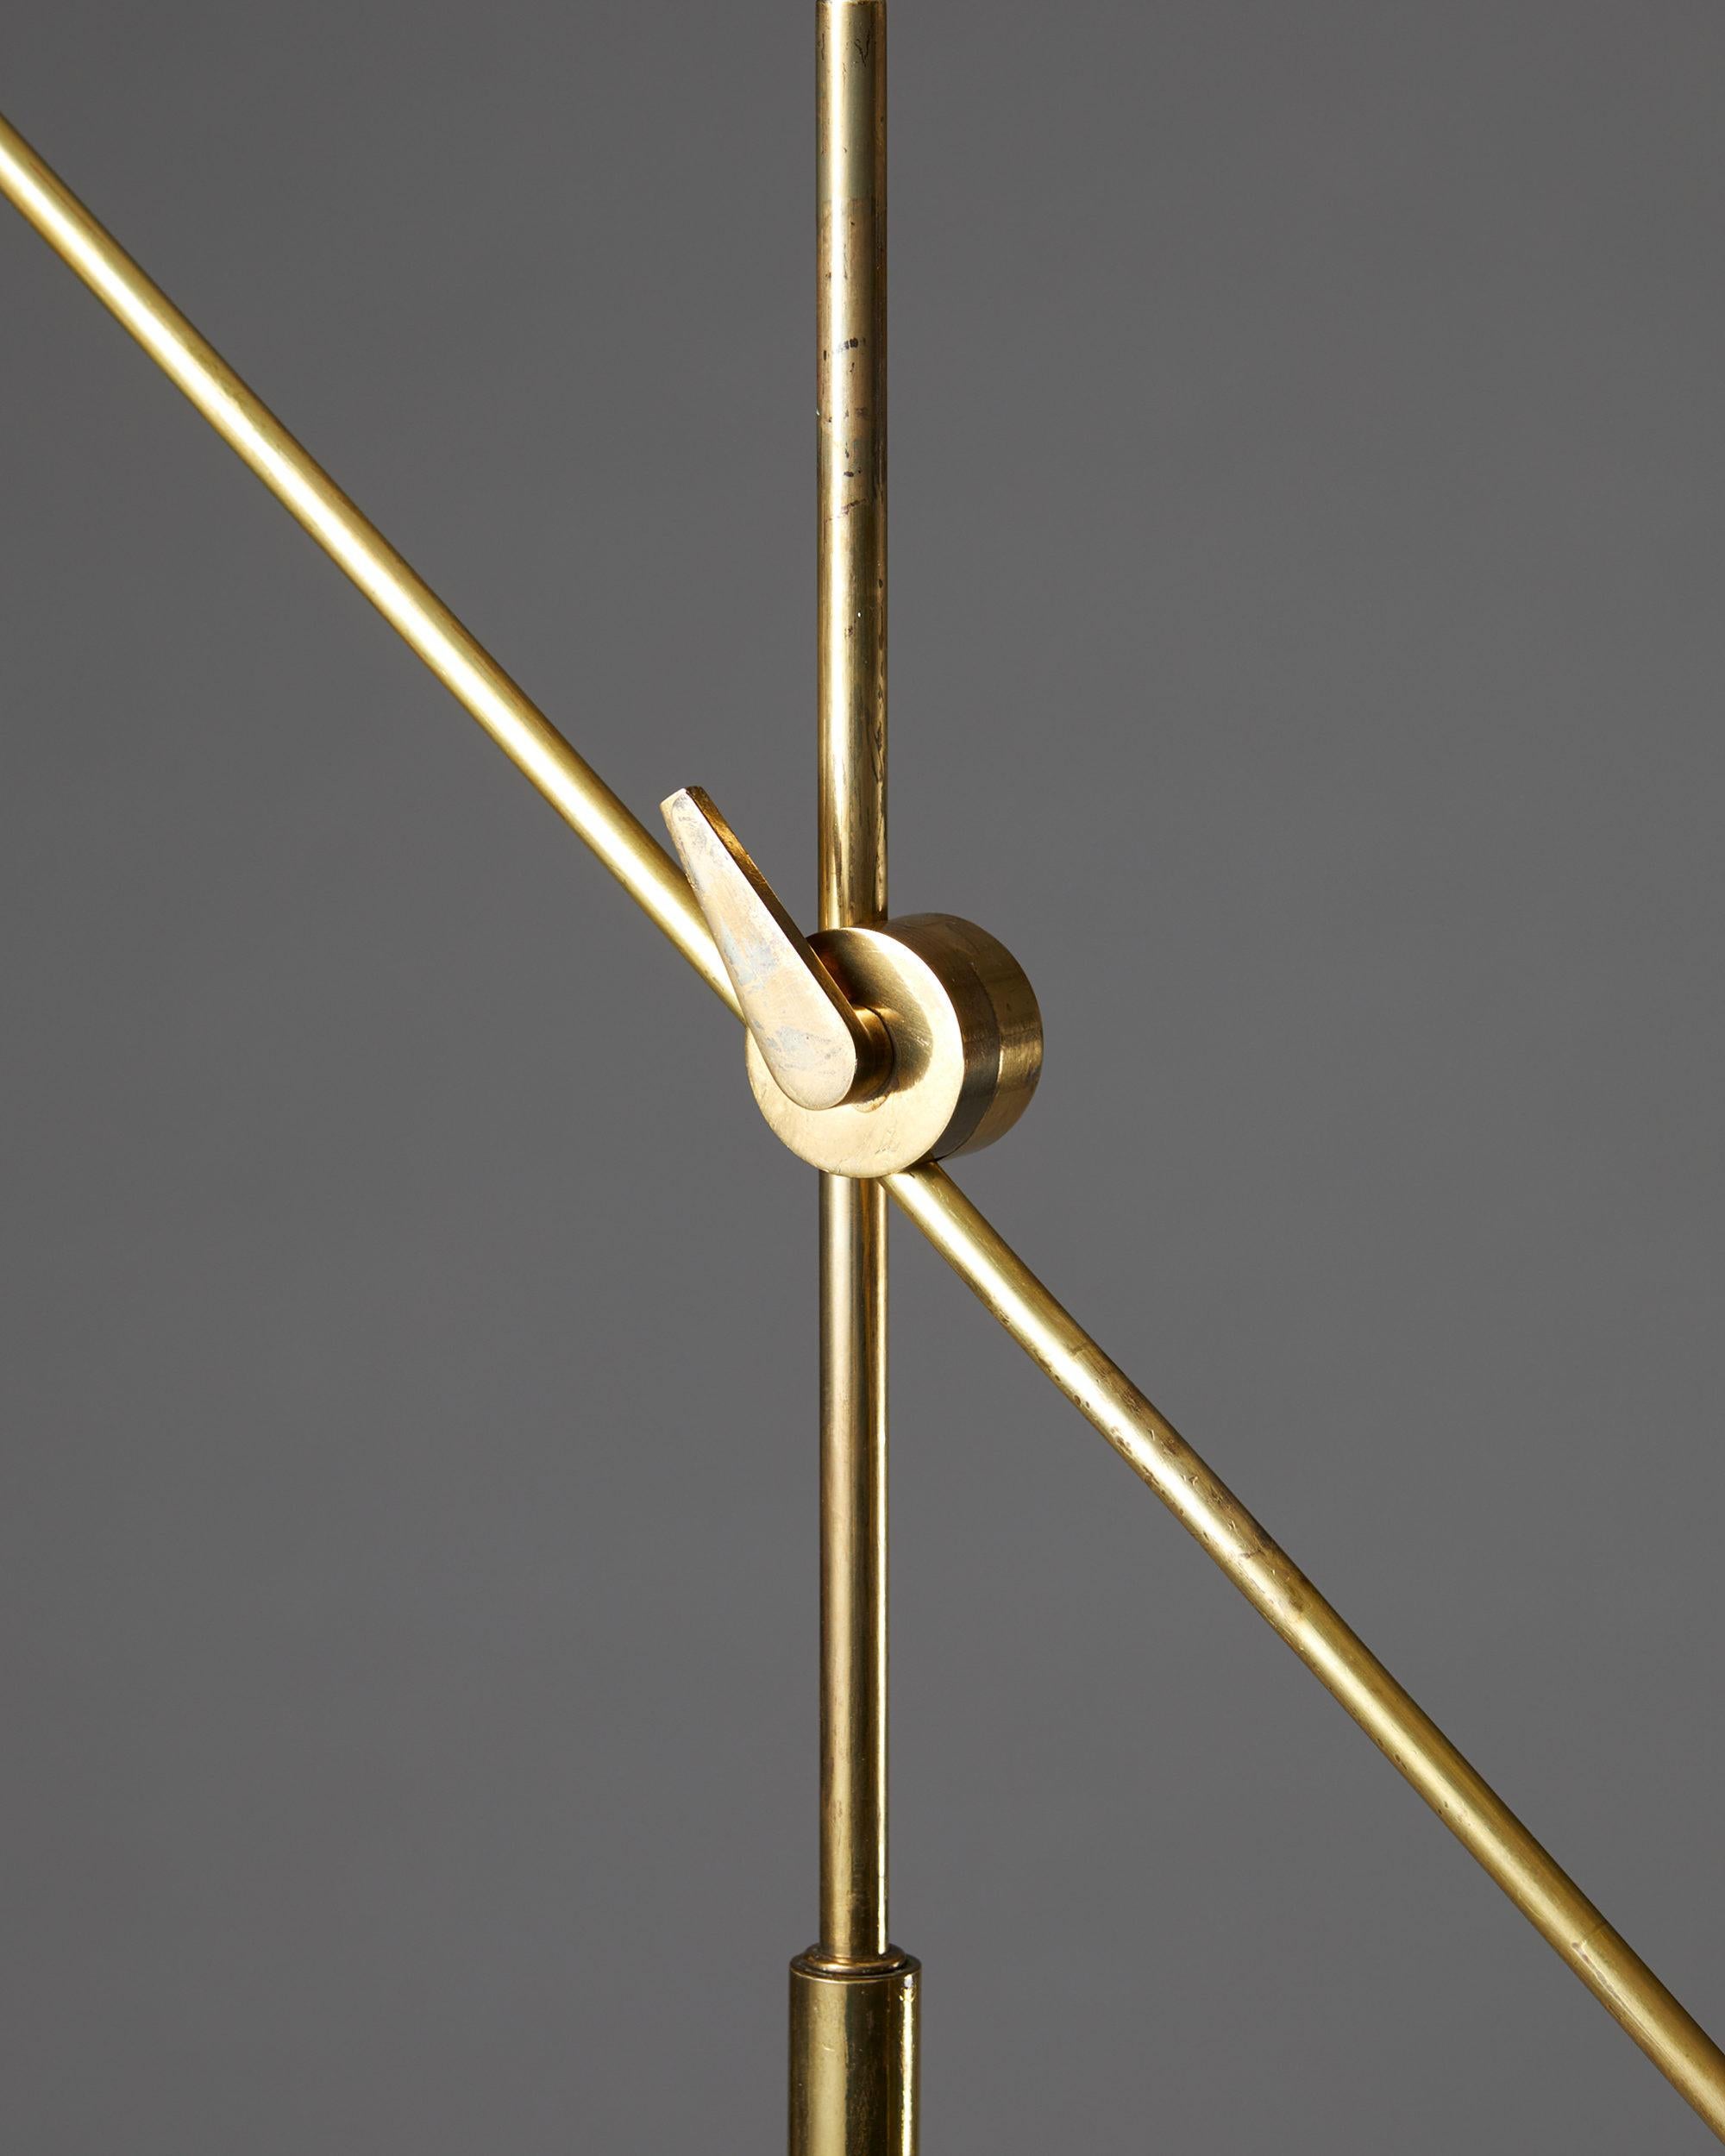 Floor lamp model 376 designed by TH. Valentiner for Poul Dinesen,
Denmark. 1960s.

Nickle plated brass.

Dimensions: 
H: 145 cm / 57